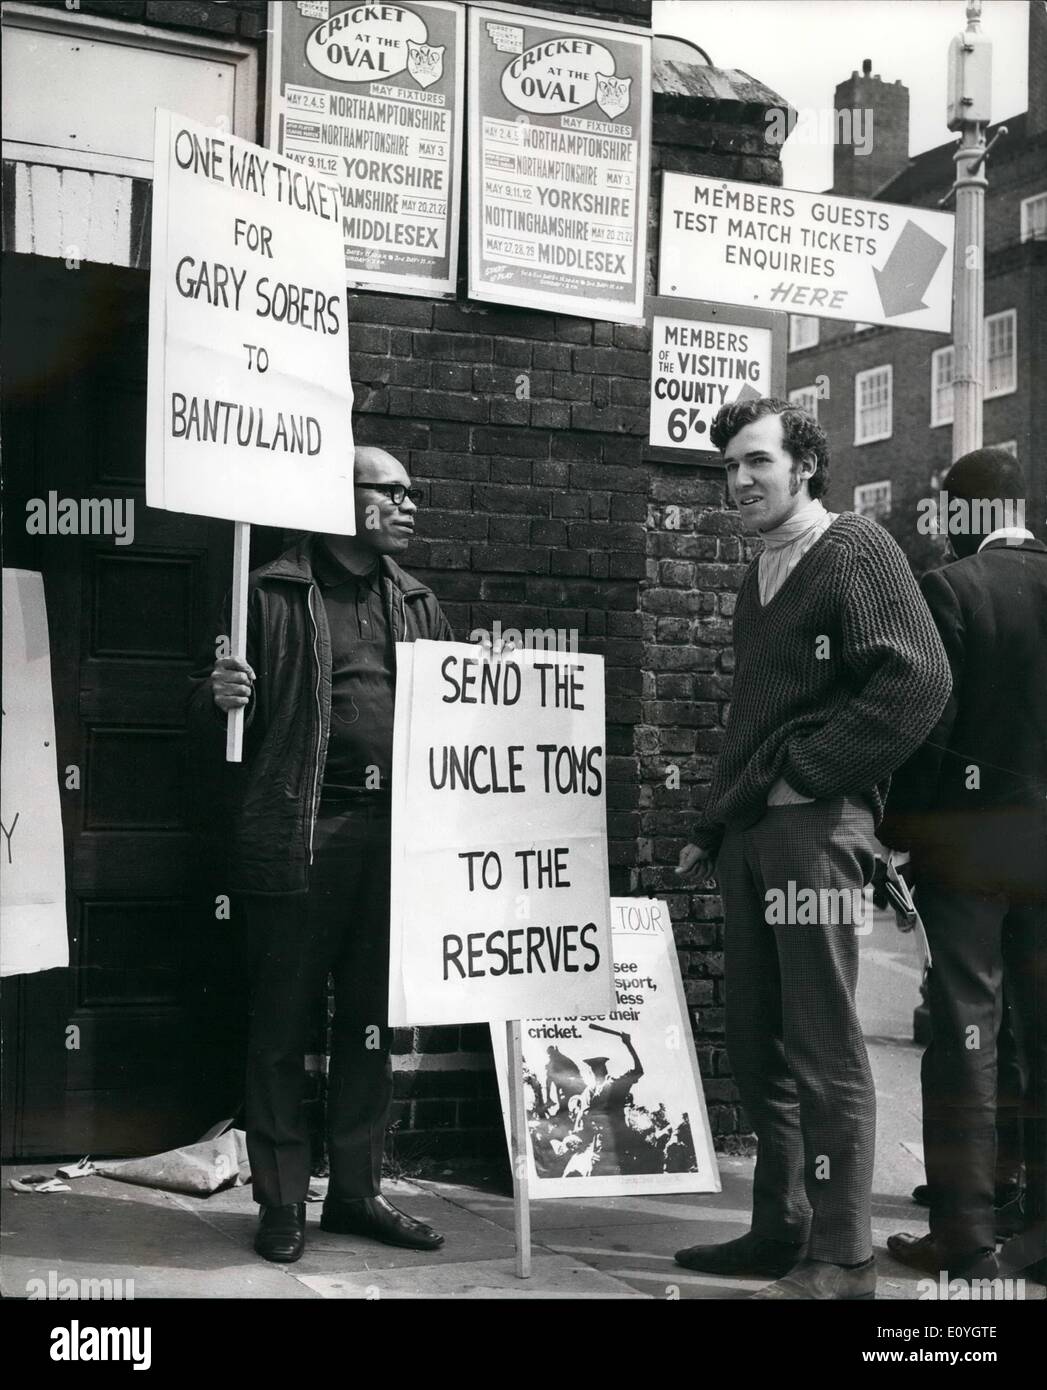 May 05, 1970 - DEMONSTRATION AT THE OVAL: West India cricketers playing for English counties will be 'pilloried' if they refuse Stock Photo